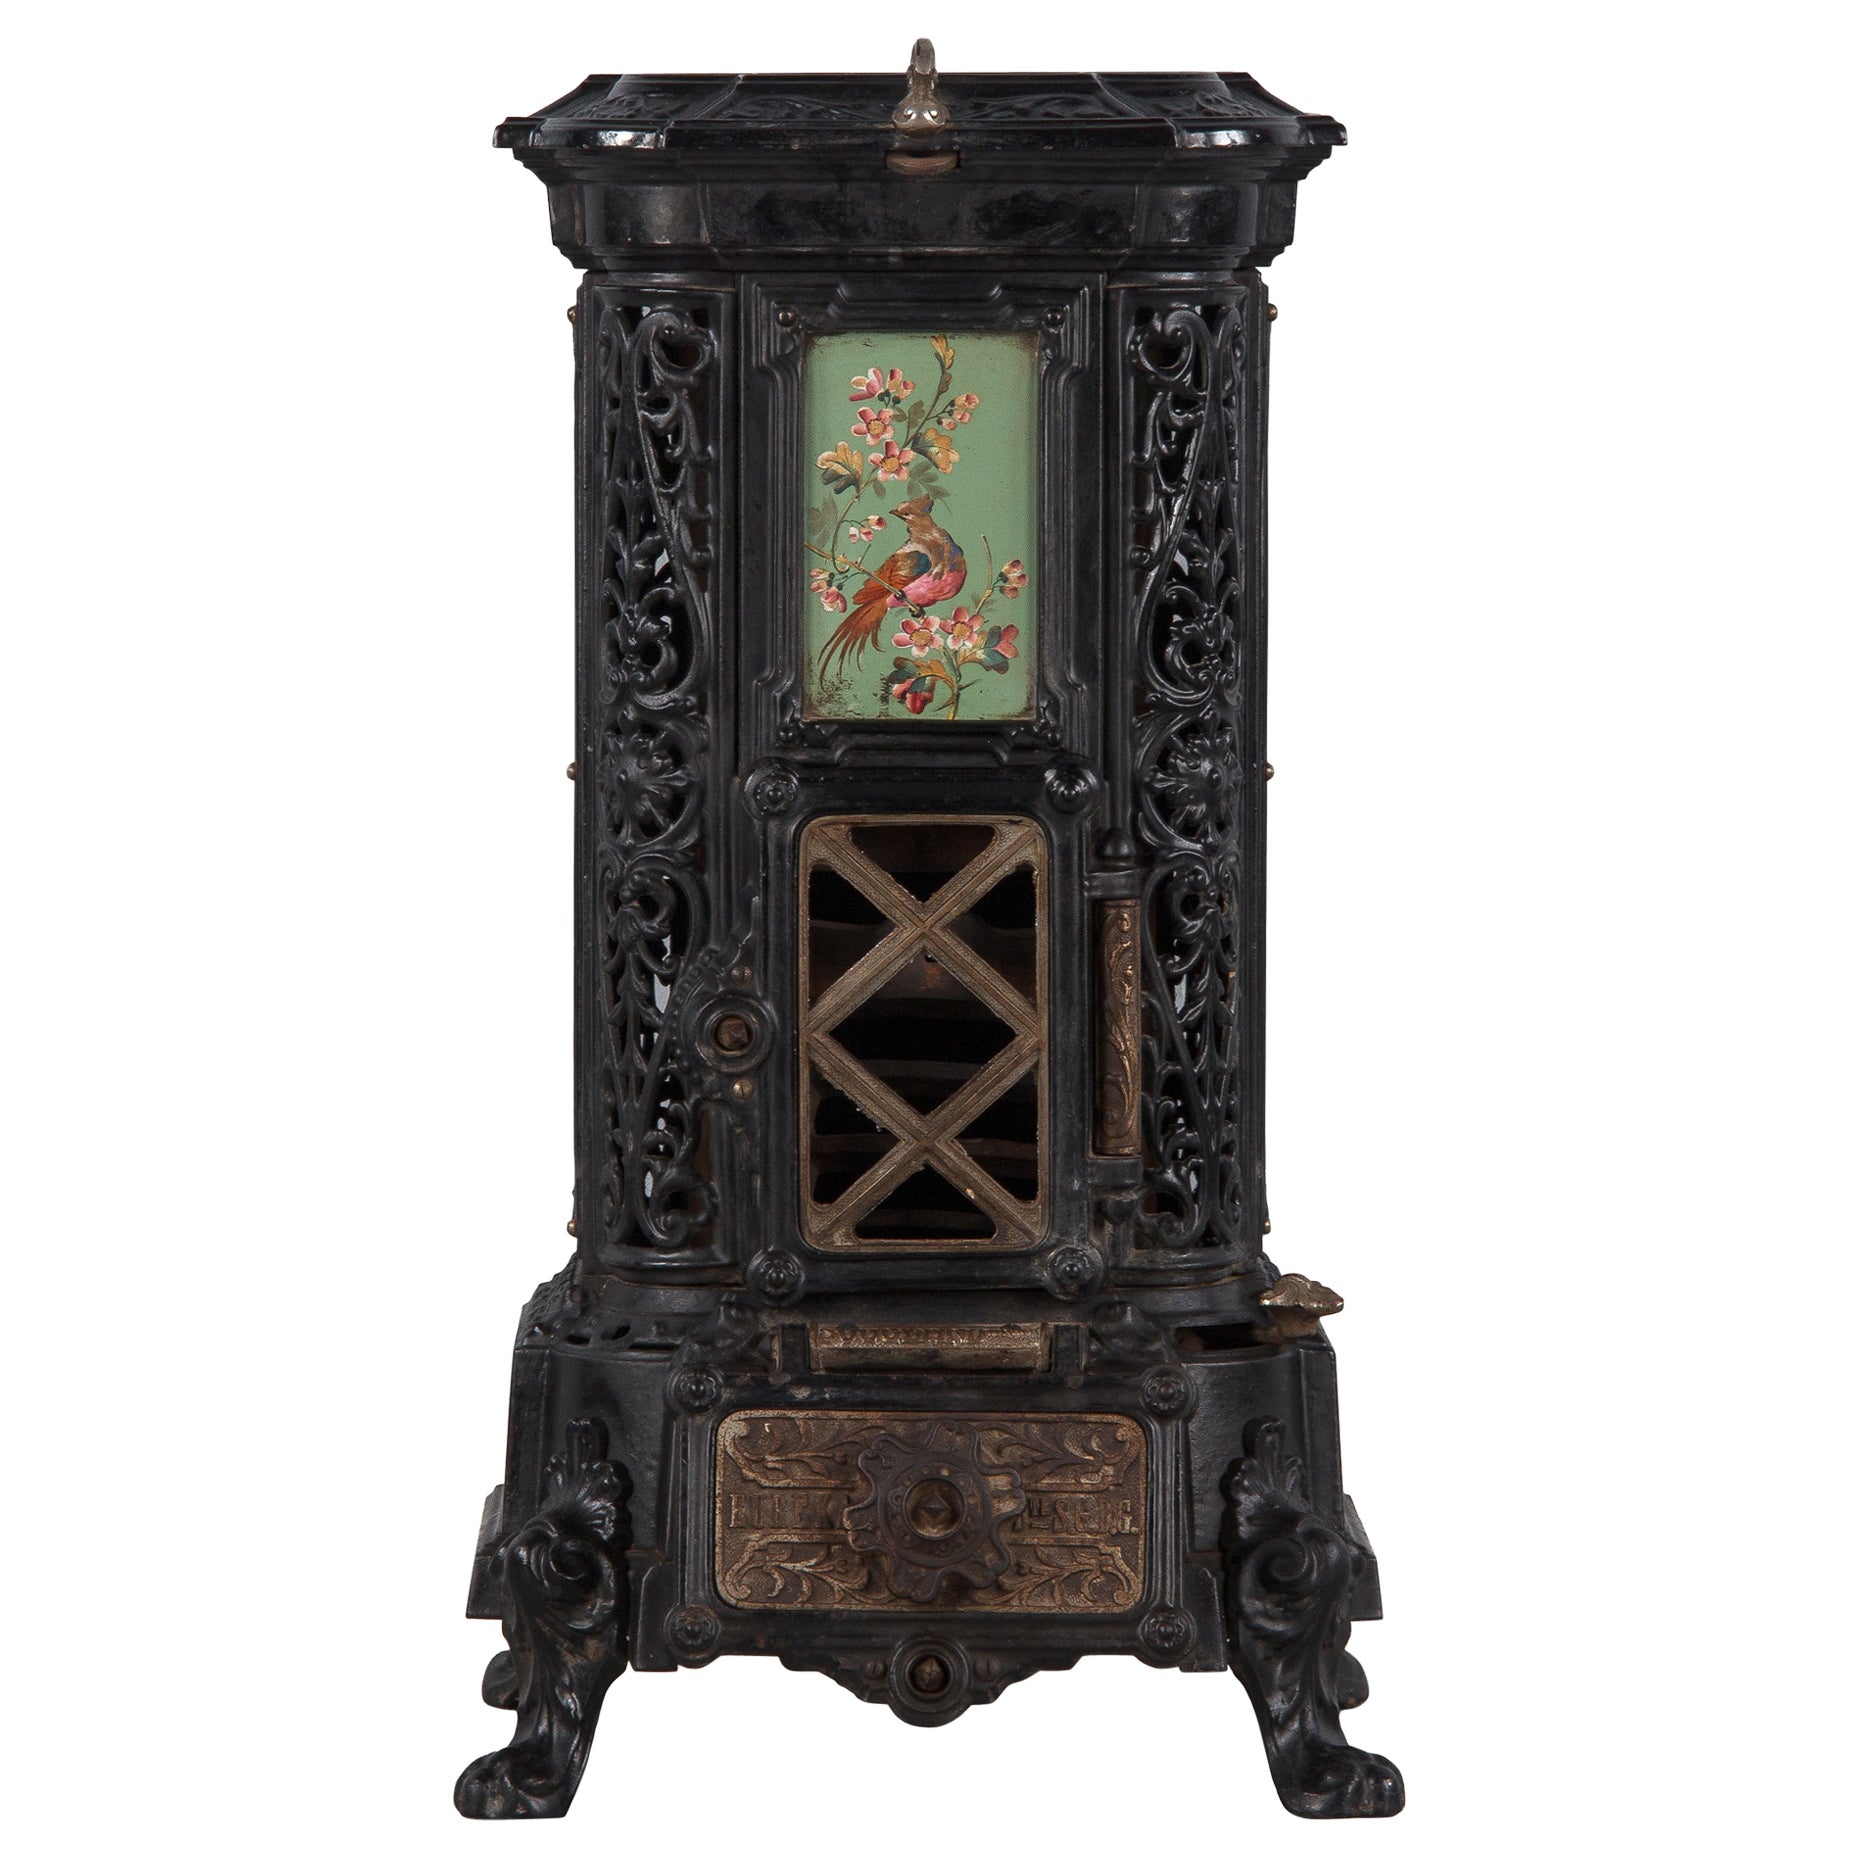 French Art Nouveau Cast Iron Coal Heater by Sougland, 1900's at 1stDibs